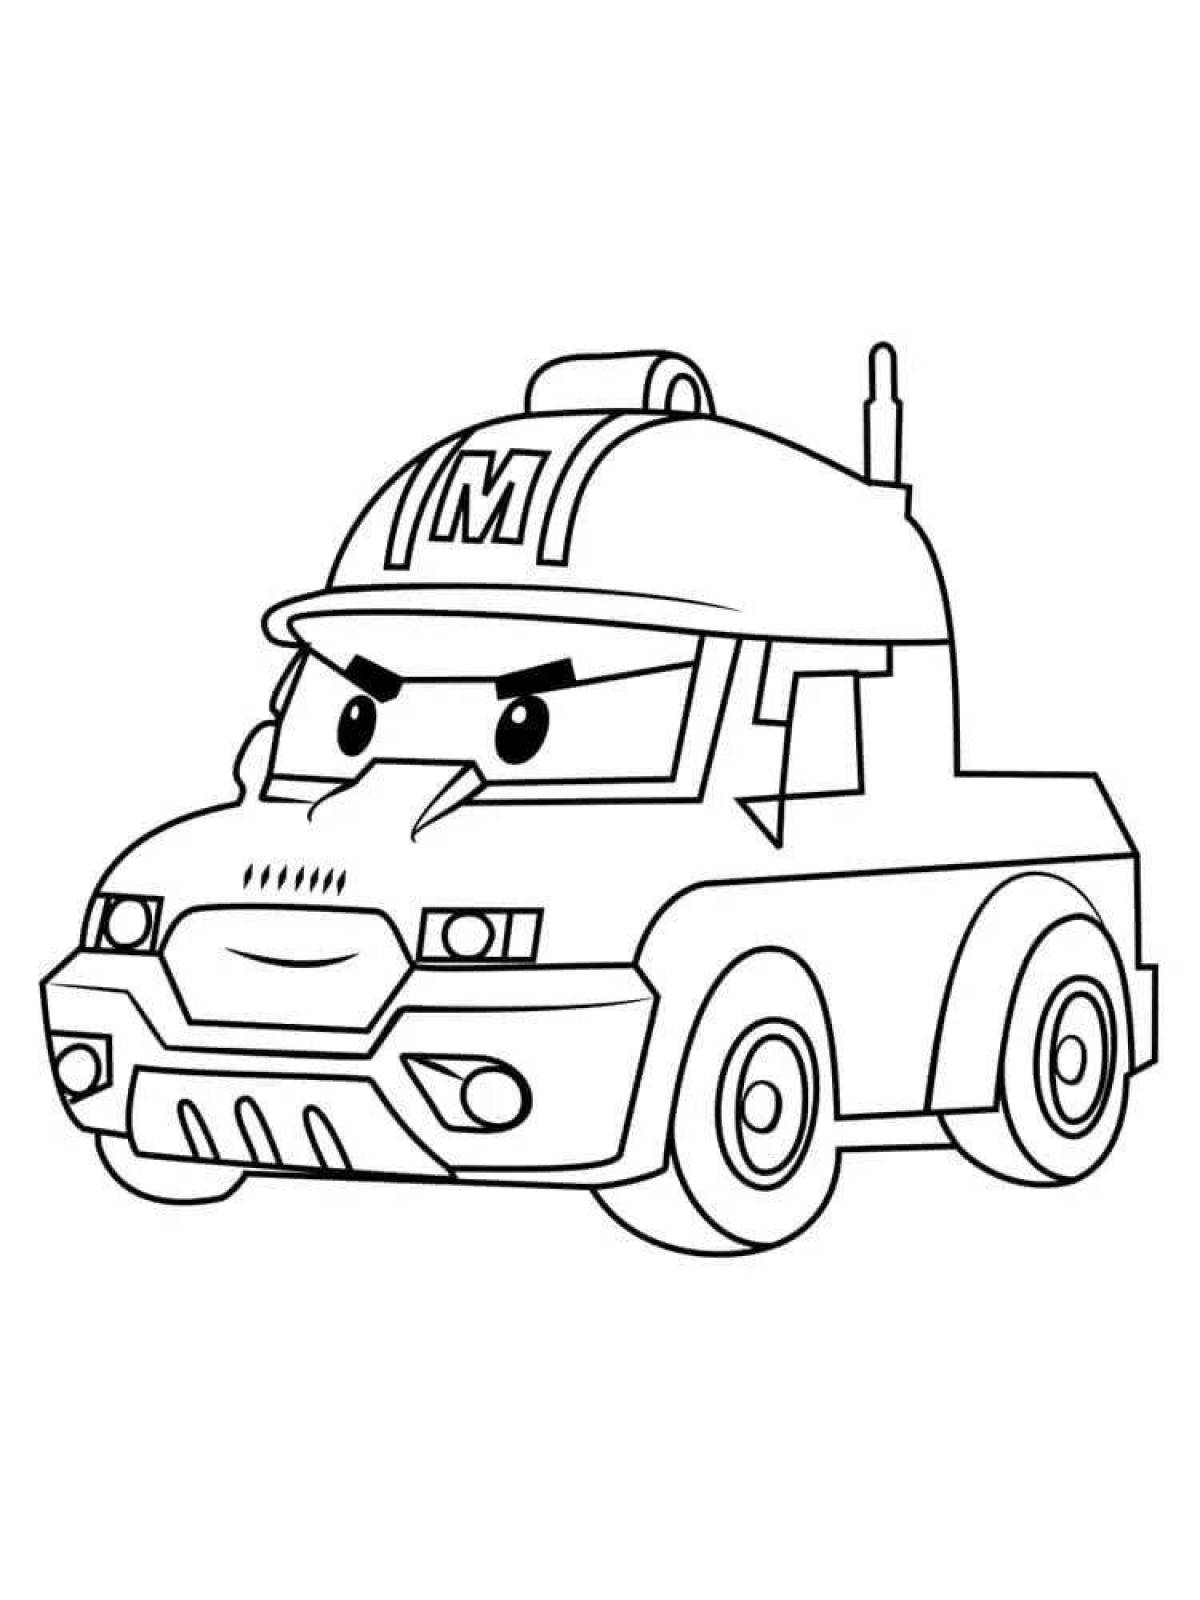 Outstanding robocar coloring page for boys